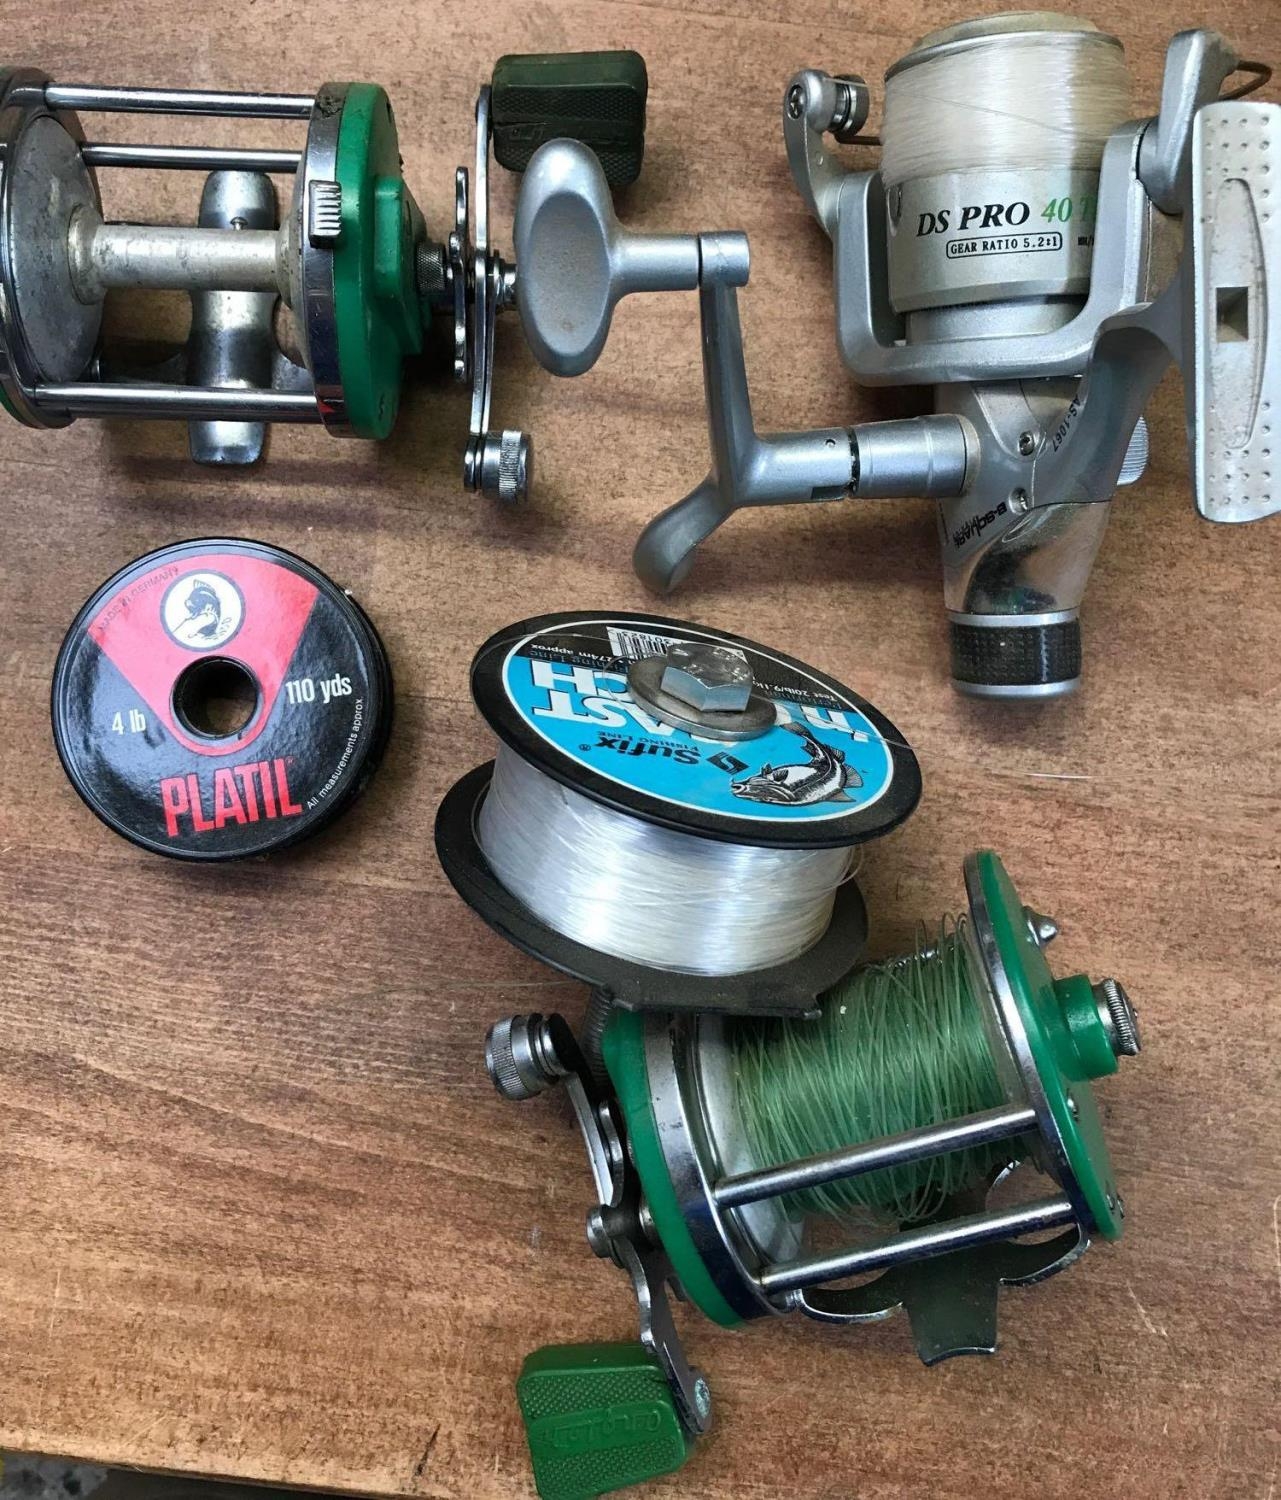 3 FISHING REELS, B SQUARE DS PRO 2 ANGLER NO.2 - 75, REEL OF SUFIX